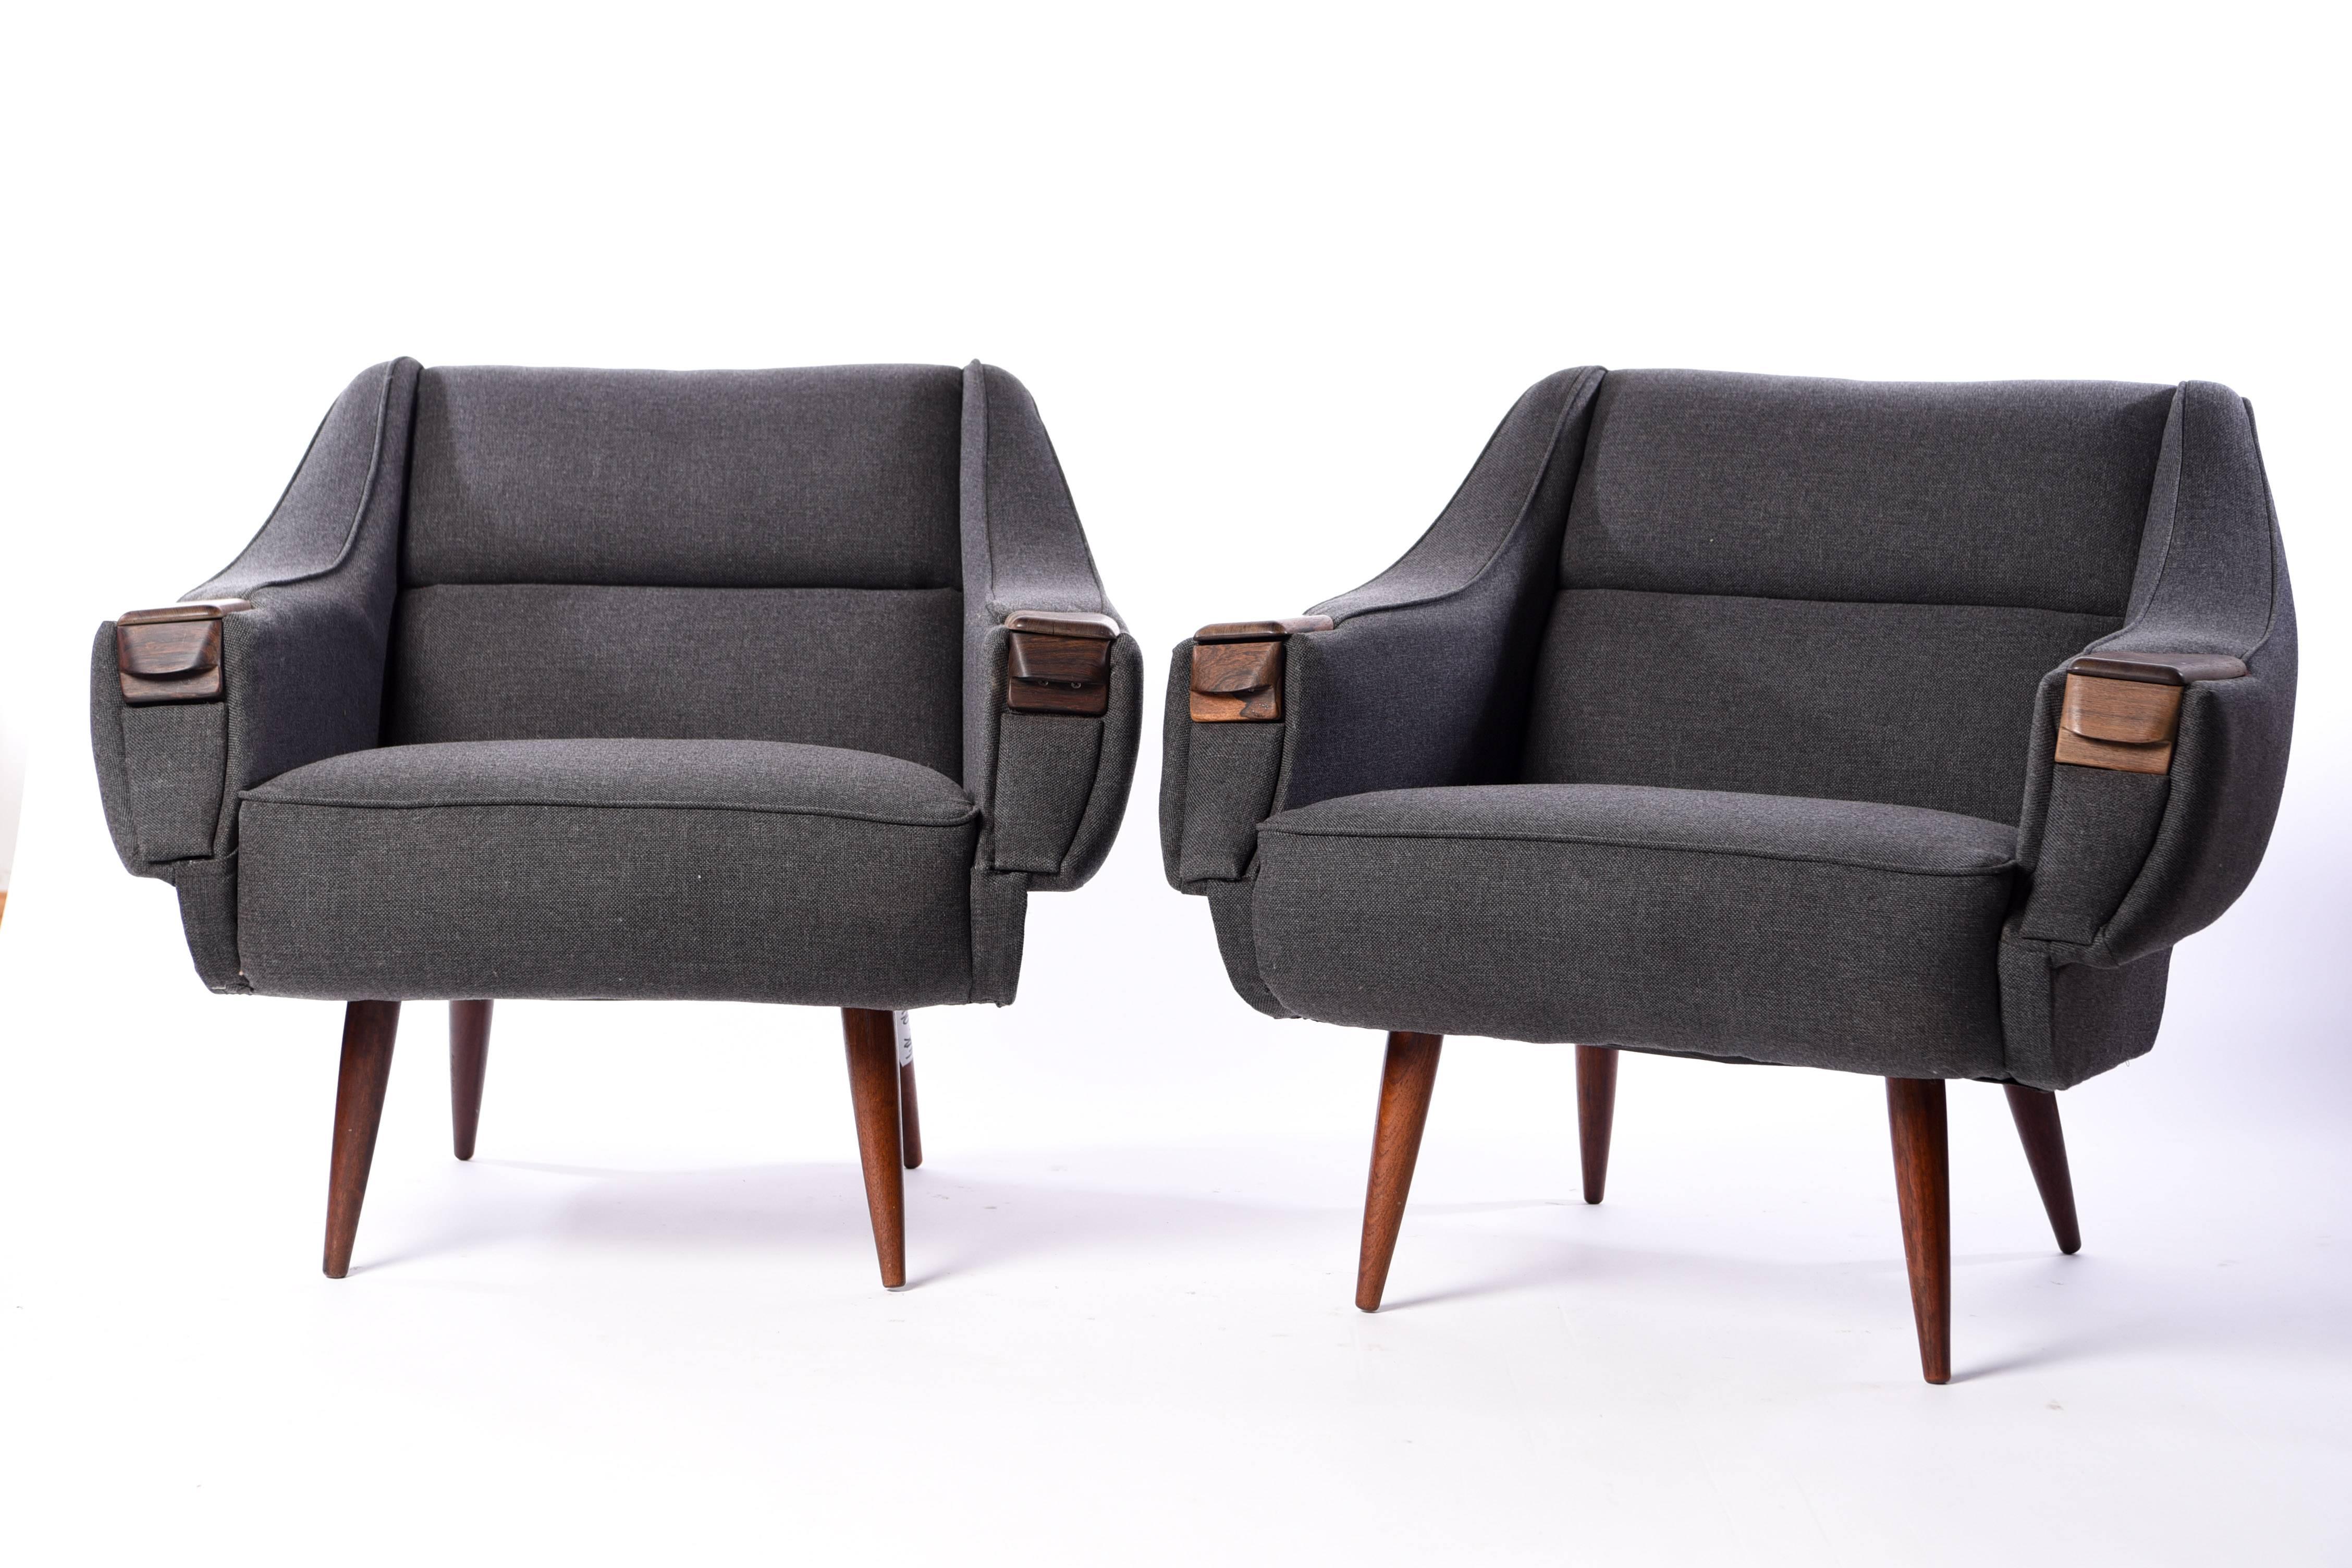 This pair of lounge chairs were designed by H.W. Klein and feature rosewood arm pads and legs. They have been newly upholstered in a stylish gray color.